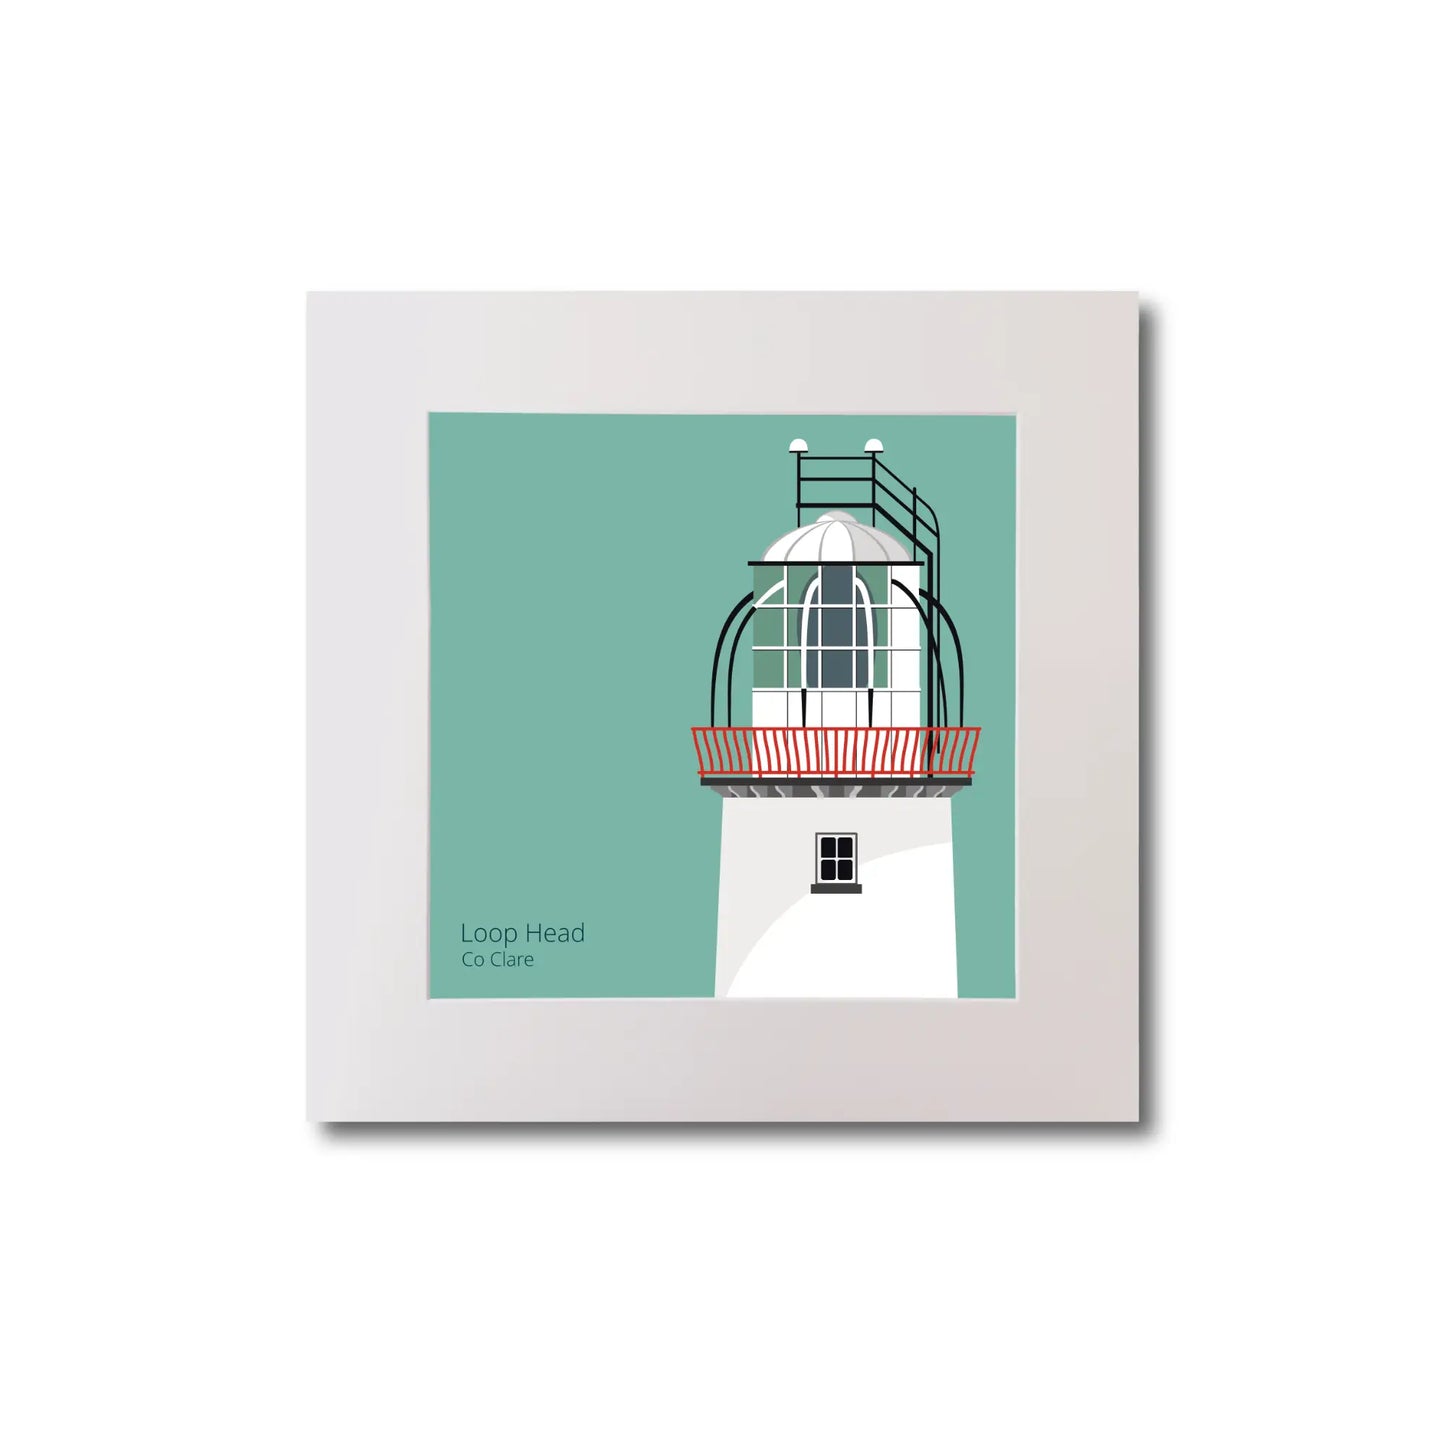 Illustration of Loop Head lighthouse on an ocean green background, mounted and measuring 20x20cm.